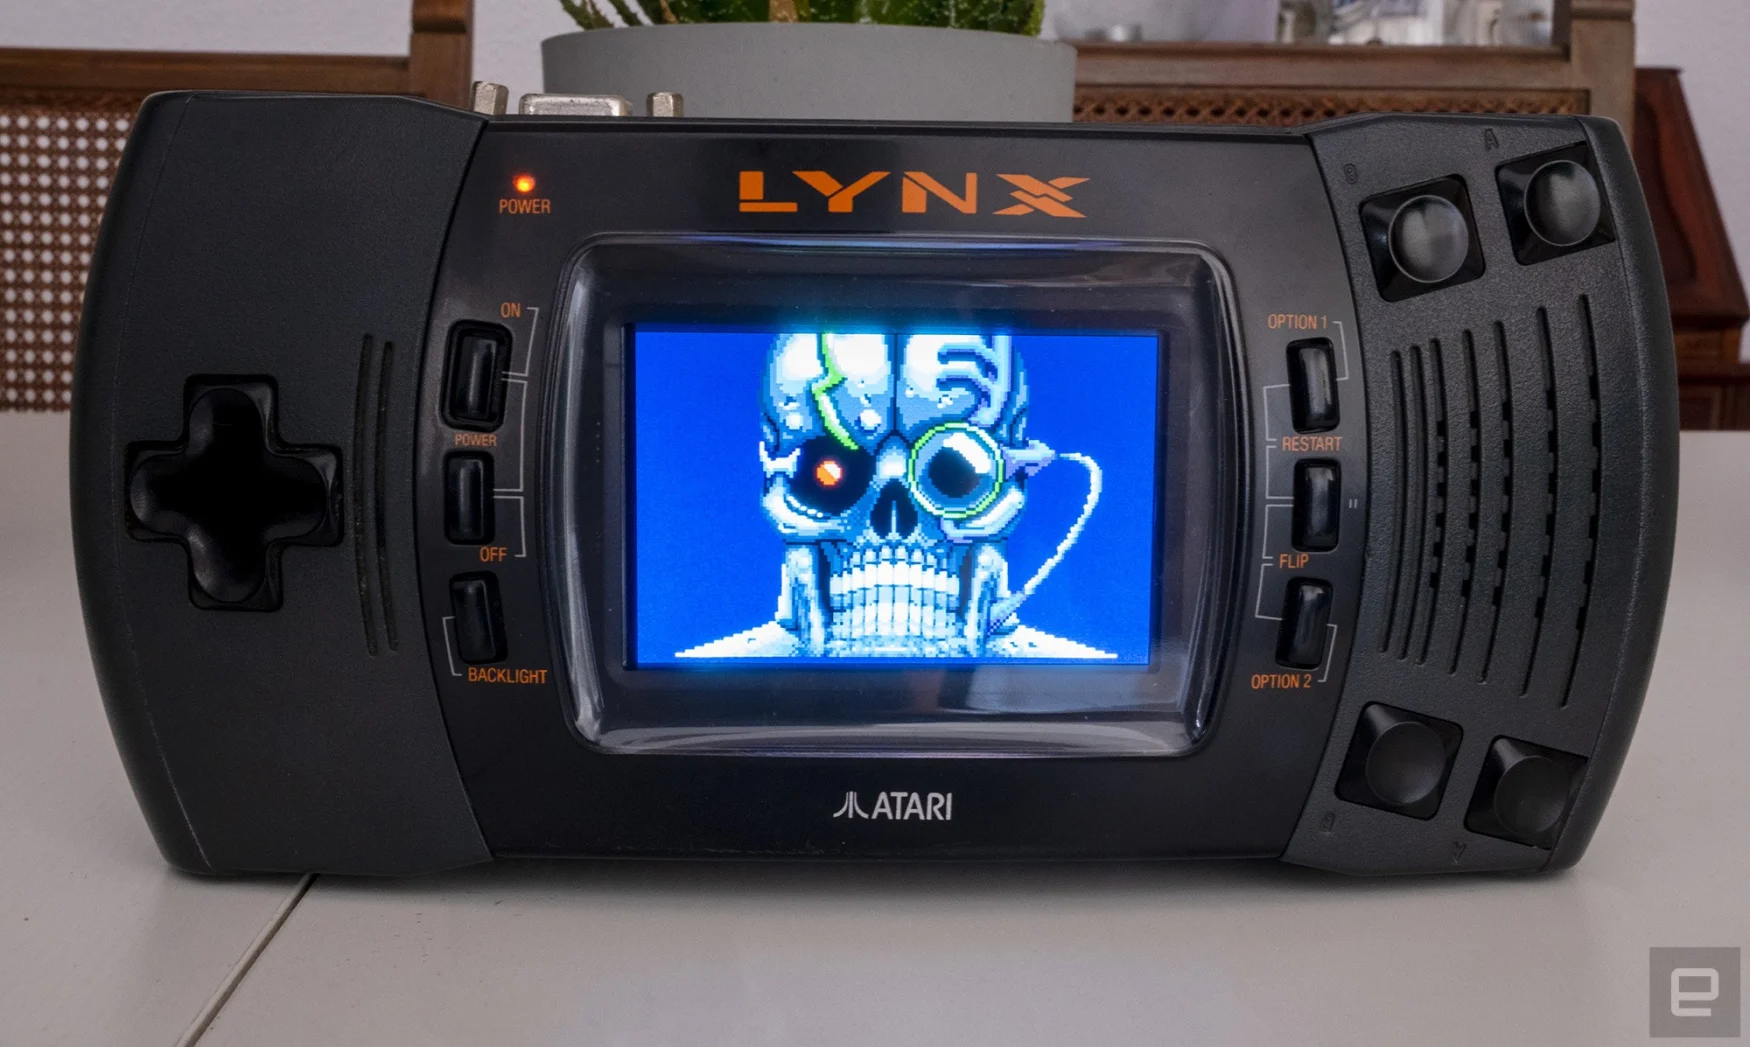 Cyber Virus - The Lost Missions, new Atari Lynx game.